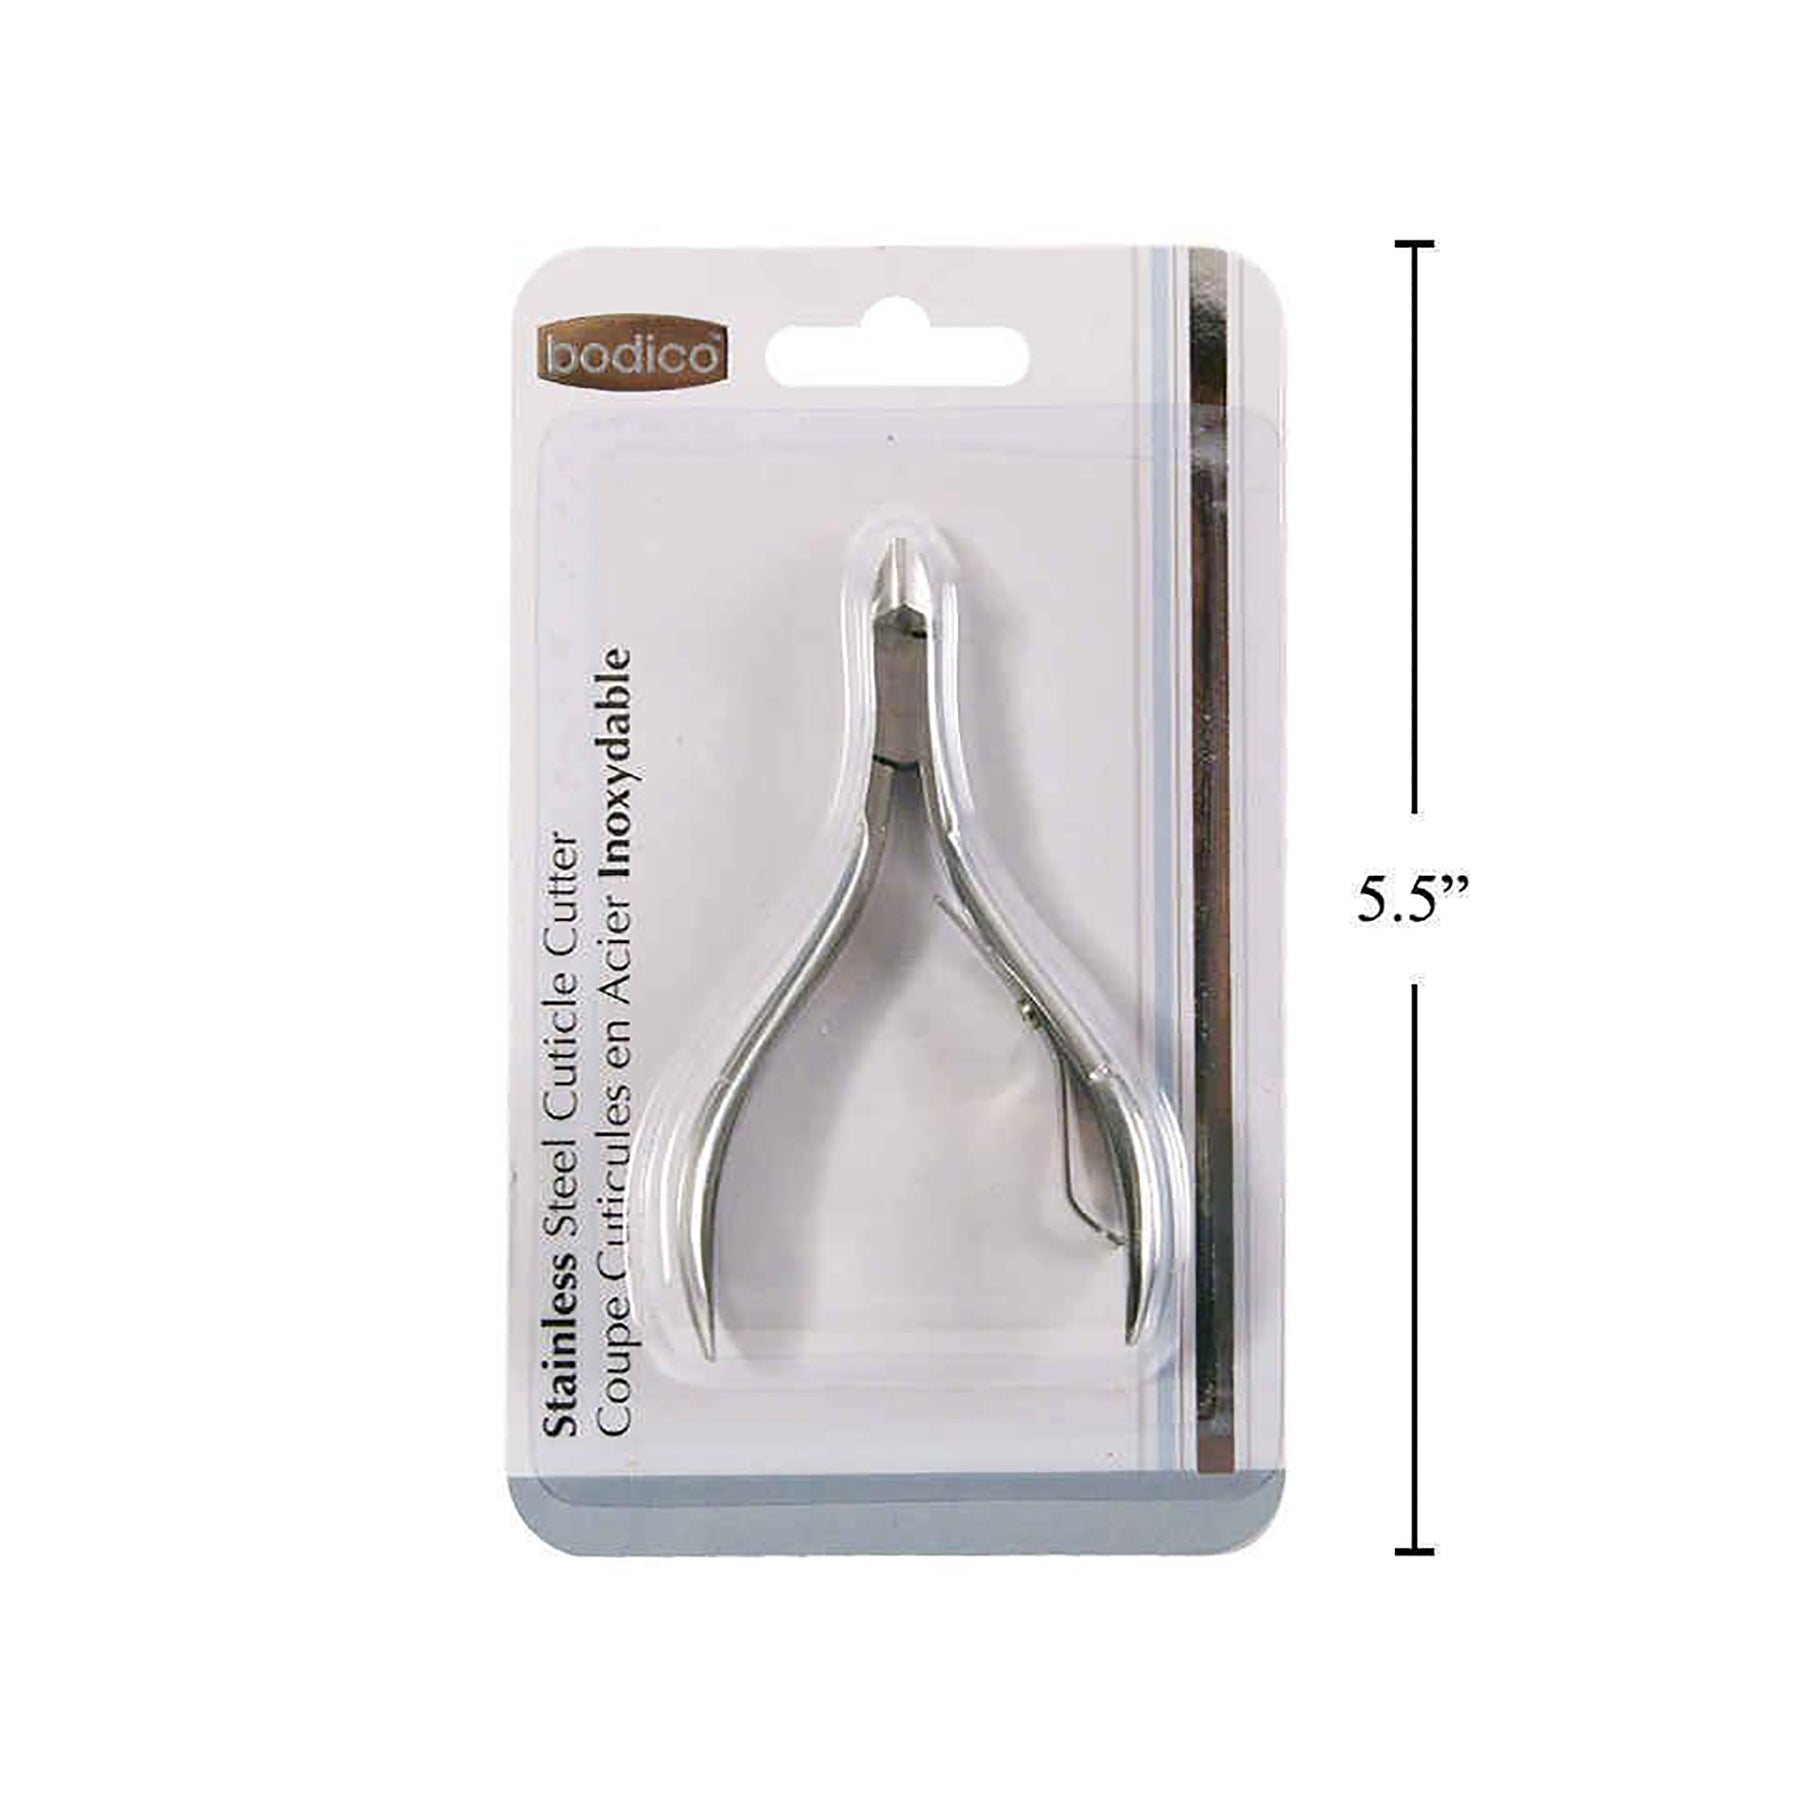 Bodico Cuticle Cutter Nipper Stainless Steel 3.75in